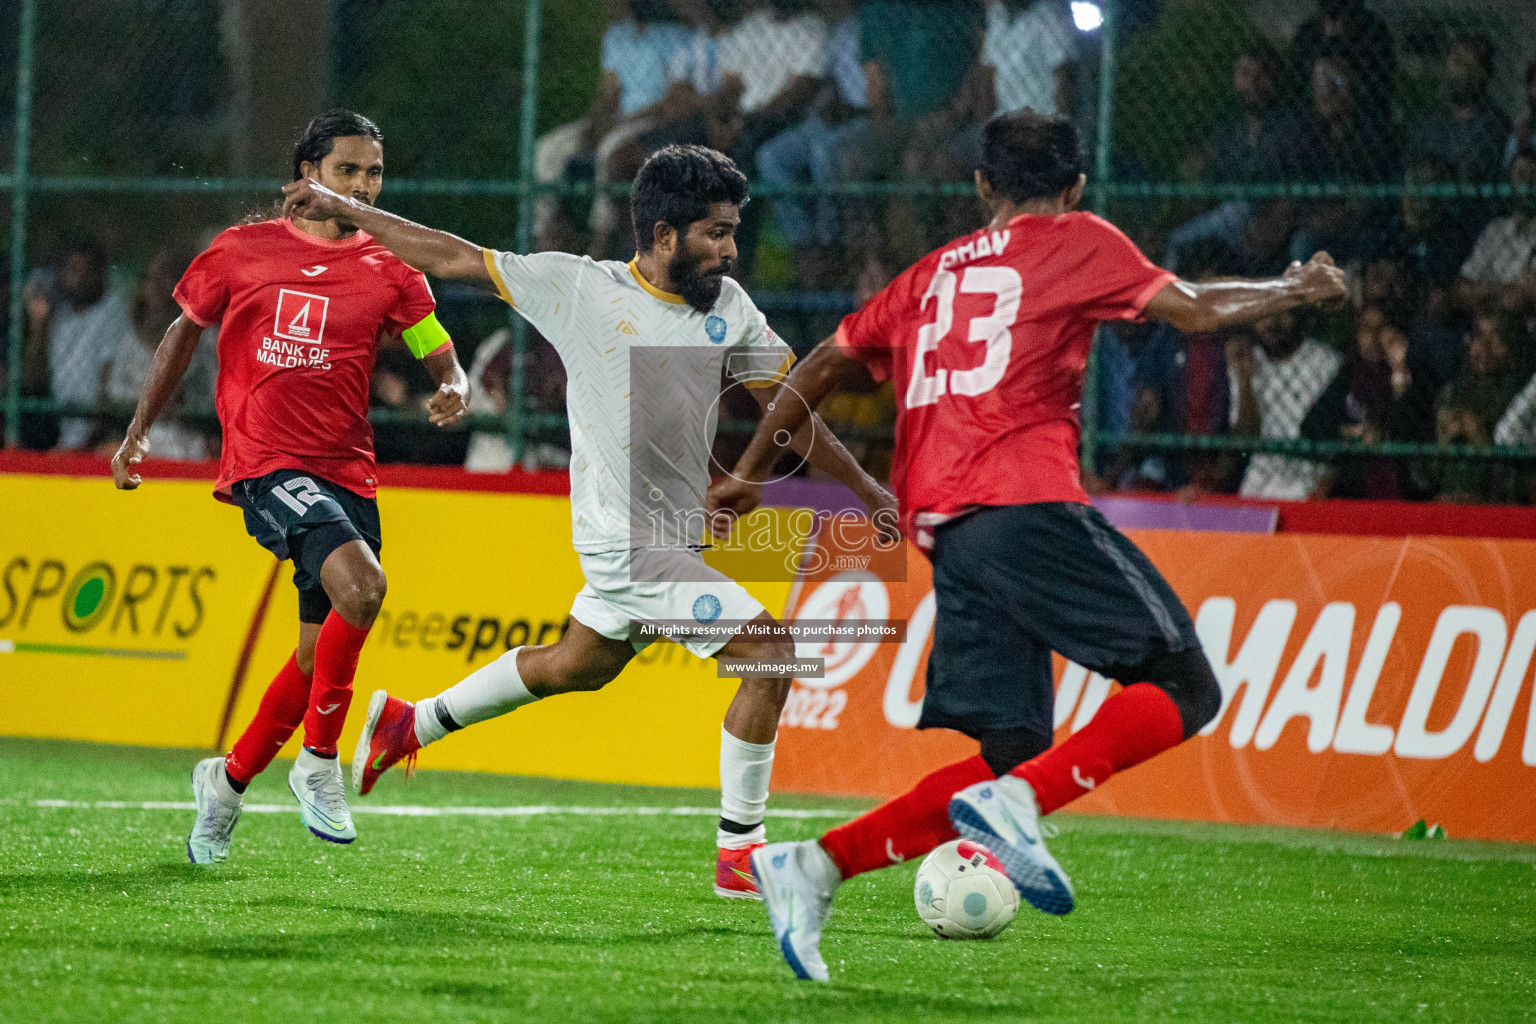 United BML vs Team Civil Court in Club Maldives Cup 2022 was held in Hulhumale', Maldives on Tuesday, 18th October 2022. Photos: Hassan Simah/ images.mv